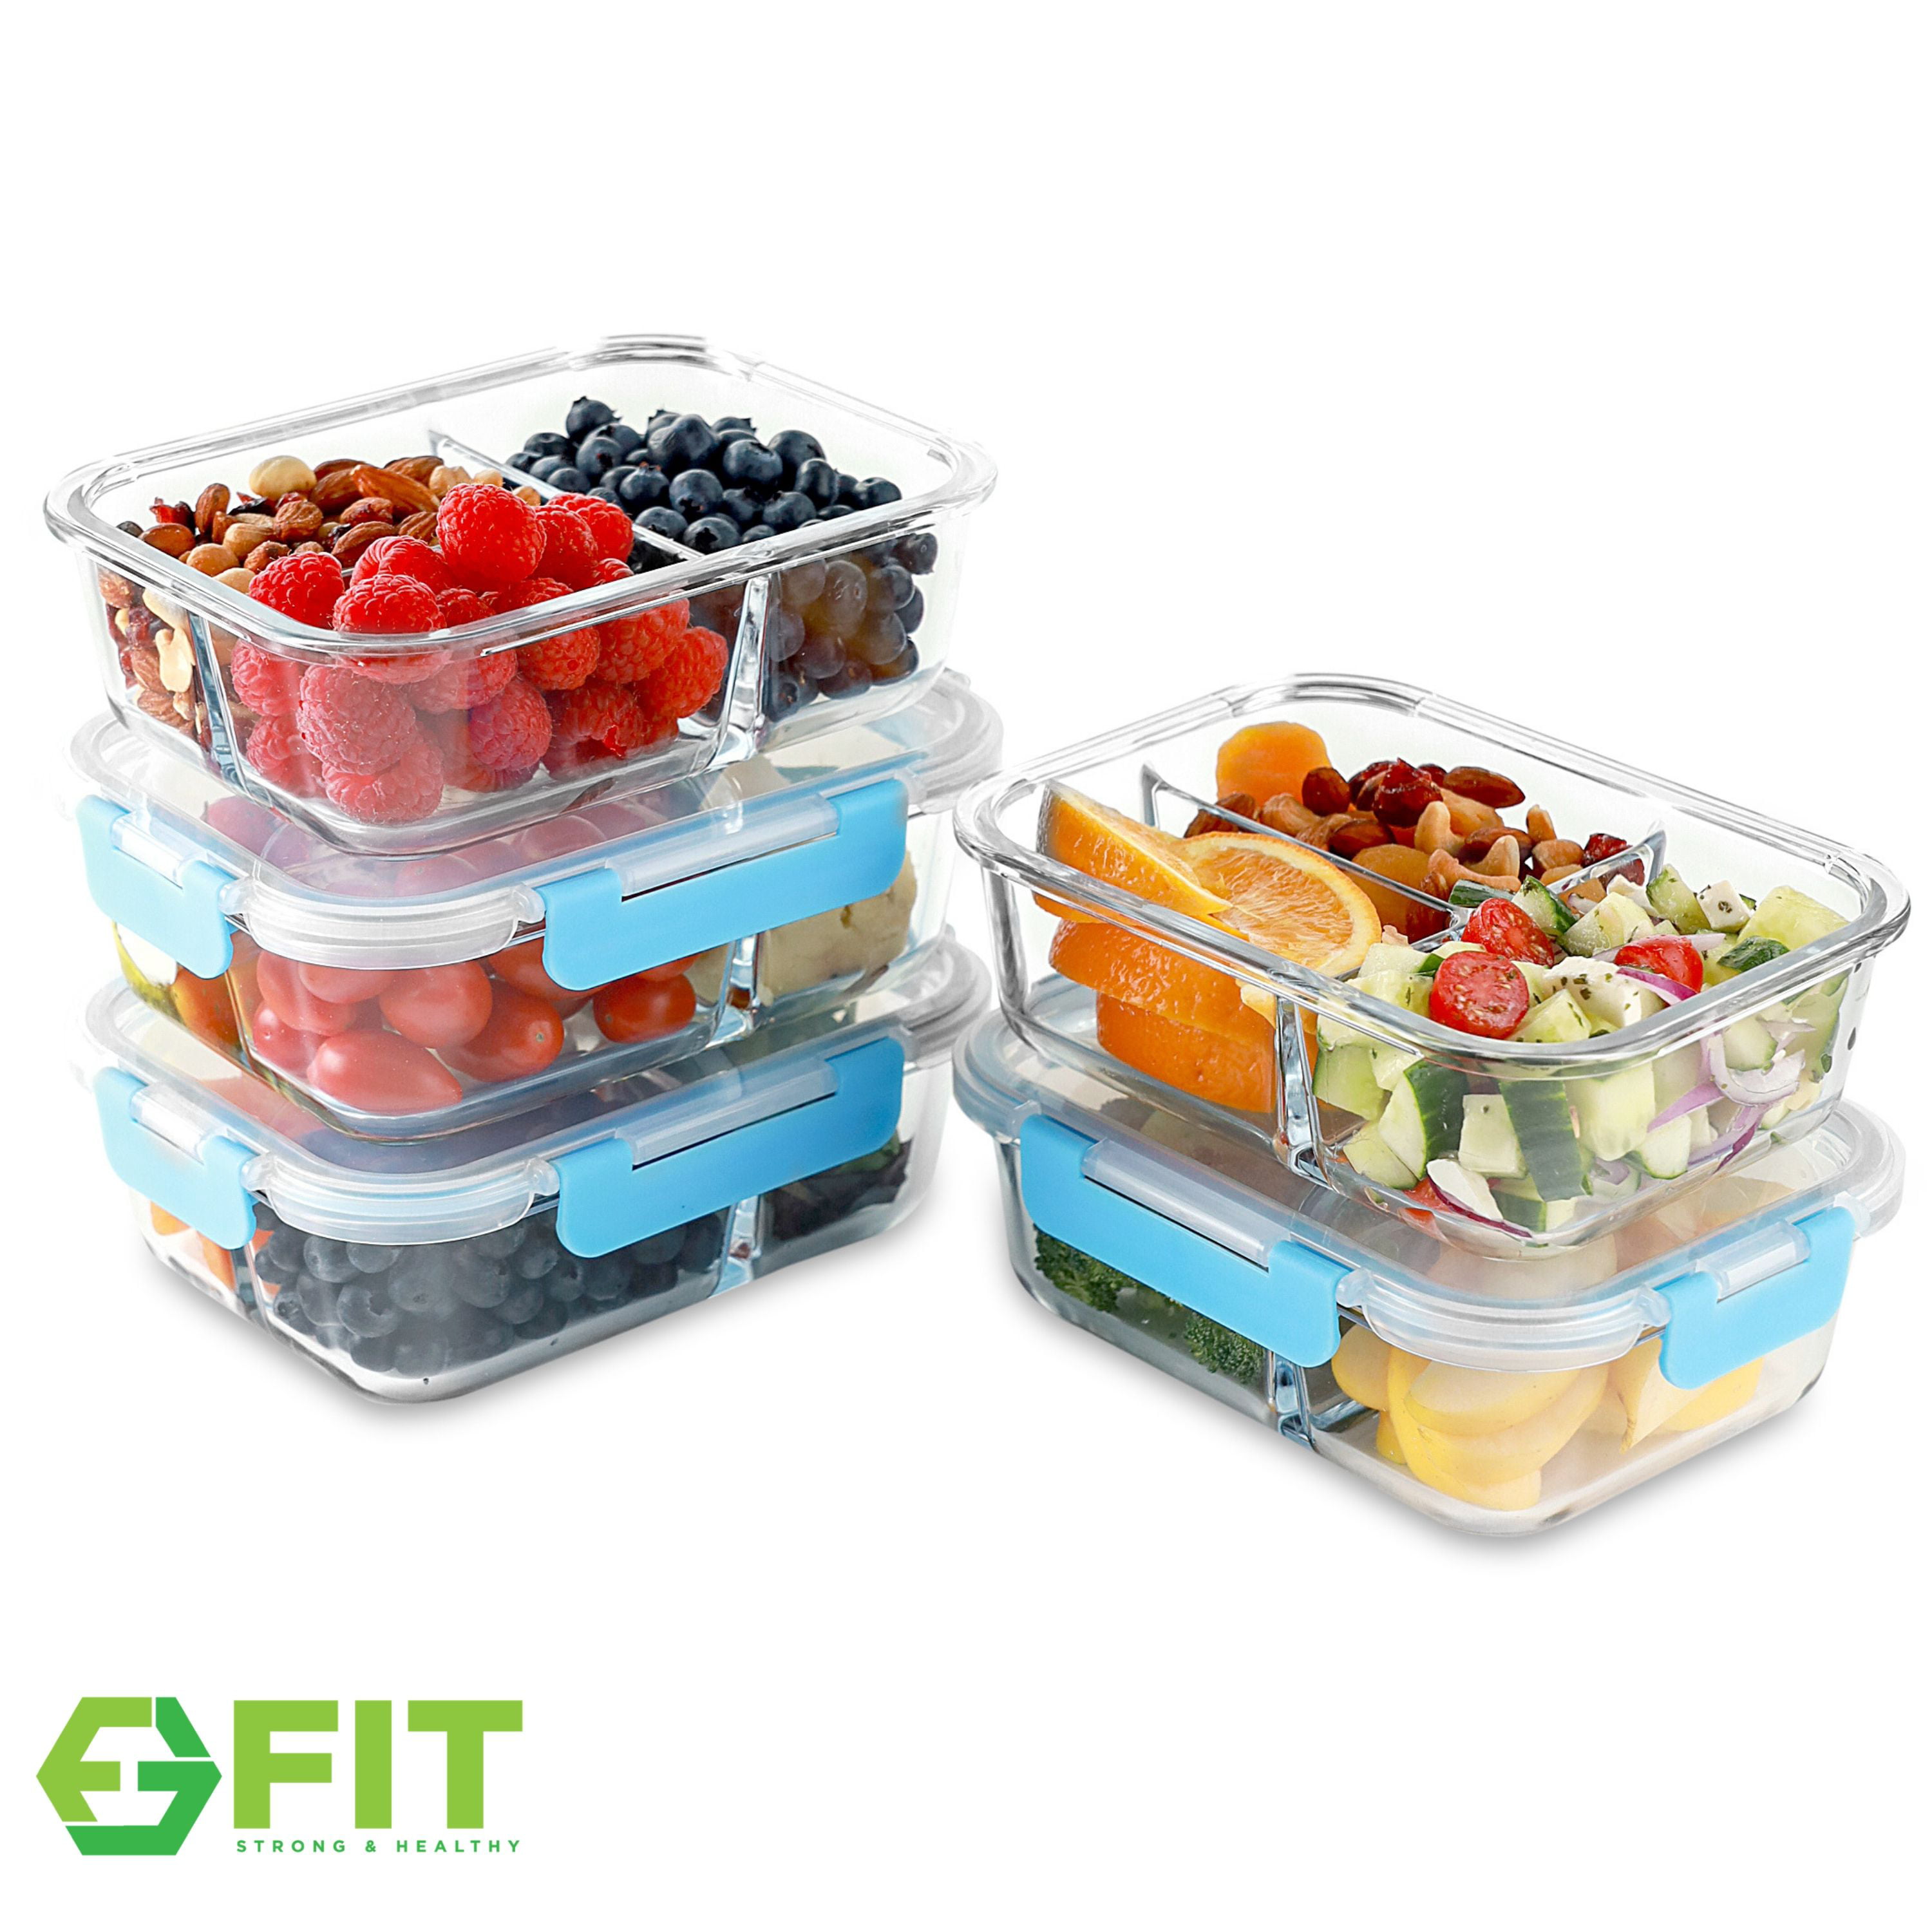 4 Glass Food Storage Containers Three Compartment Portion Control Meal Prep  with Snap on Lids, 1 unit - Kroger